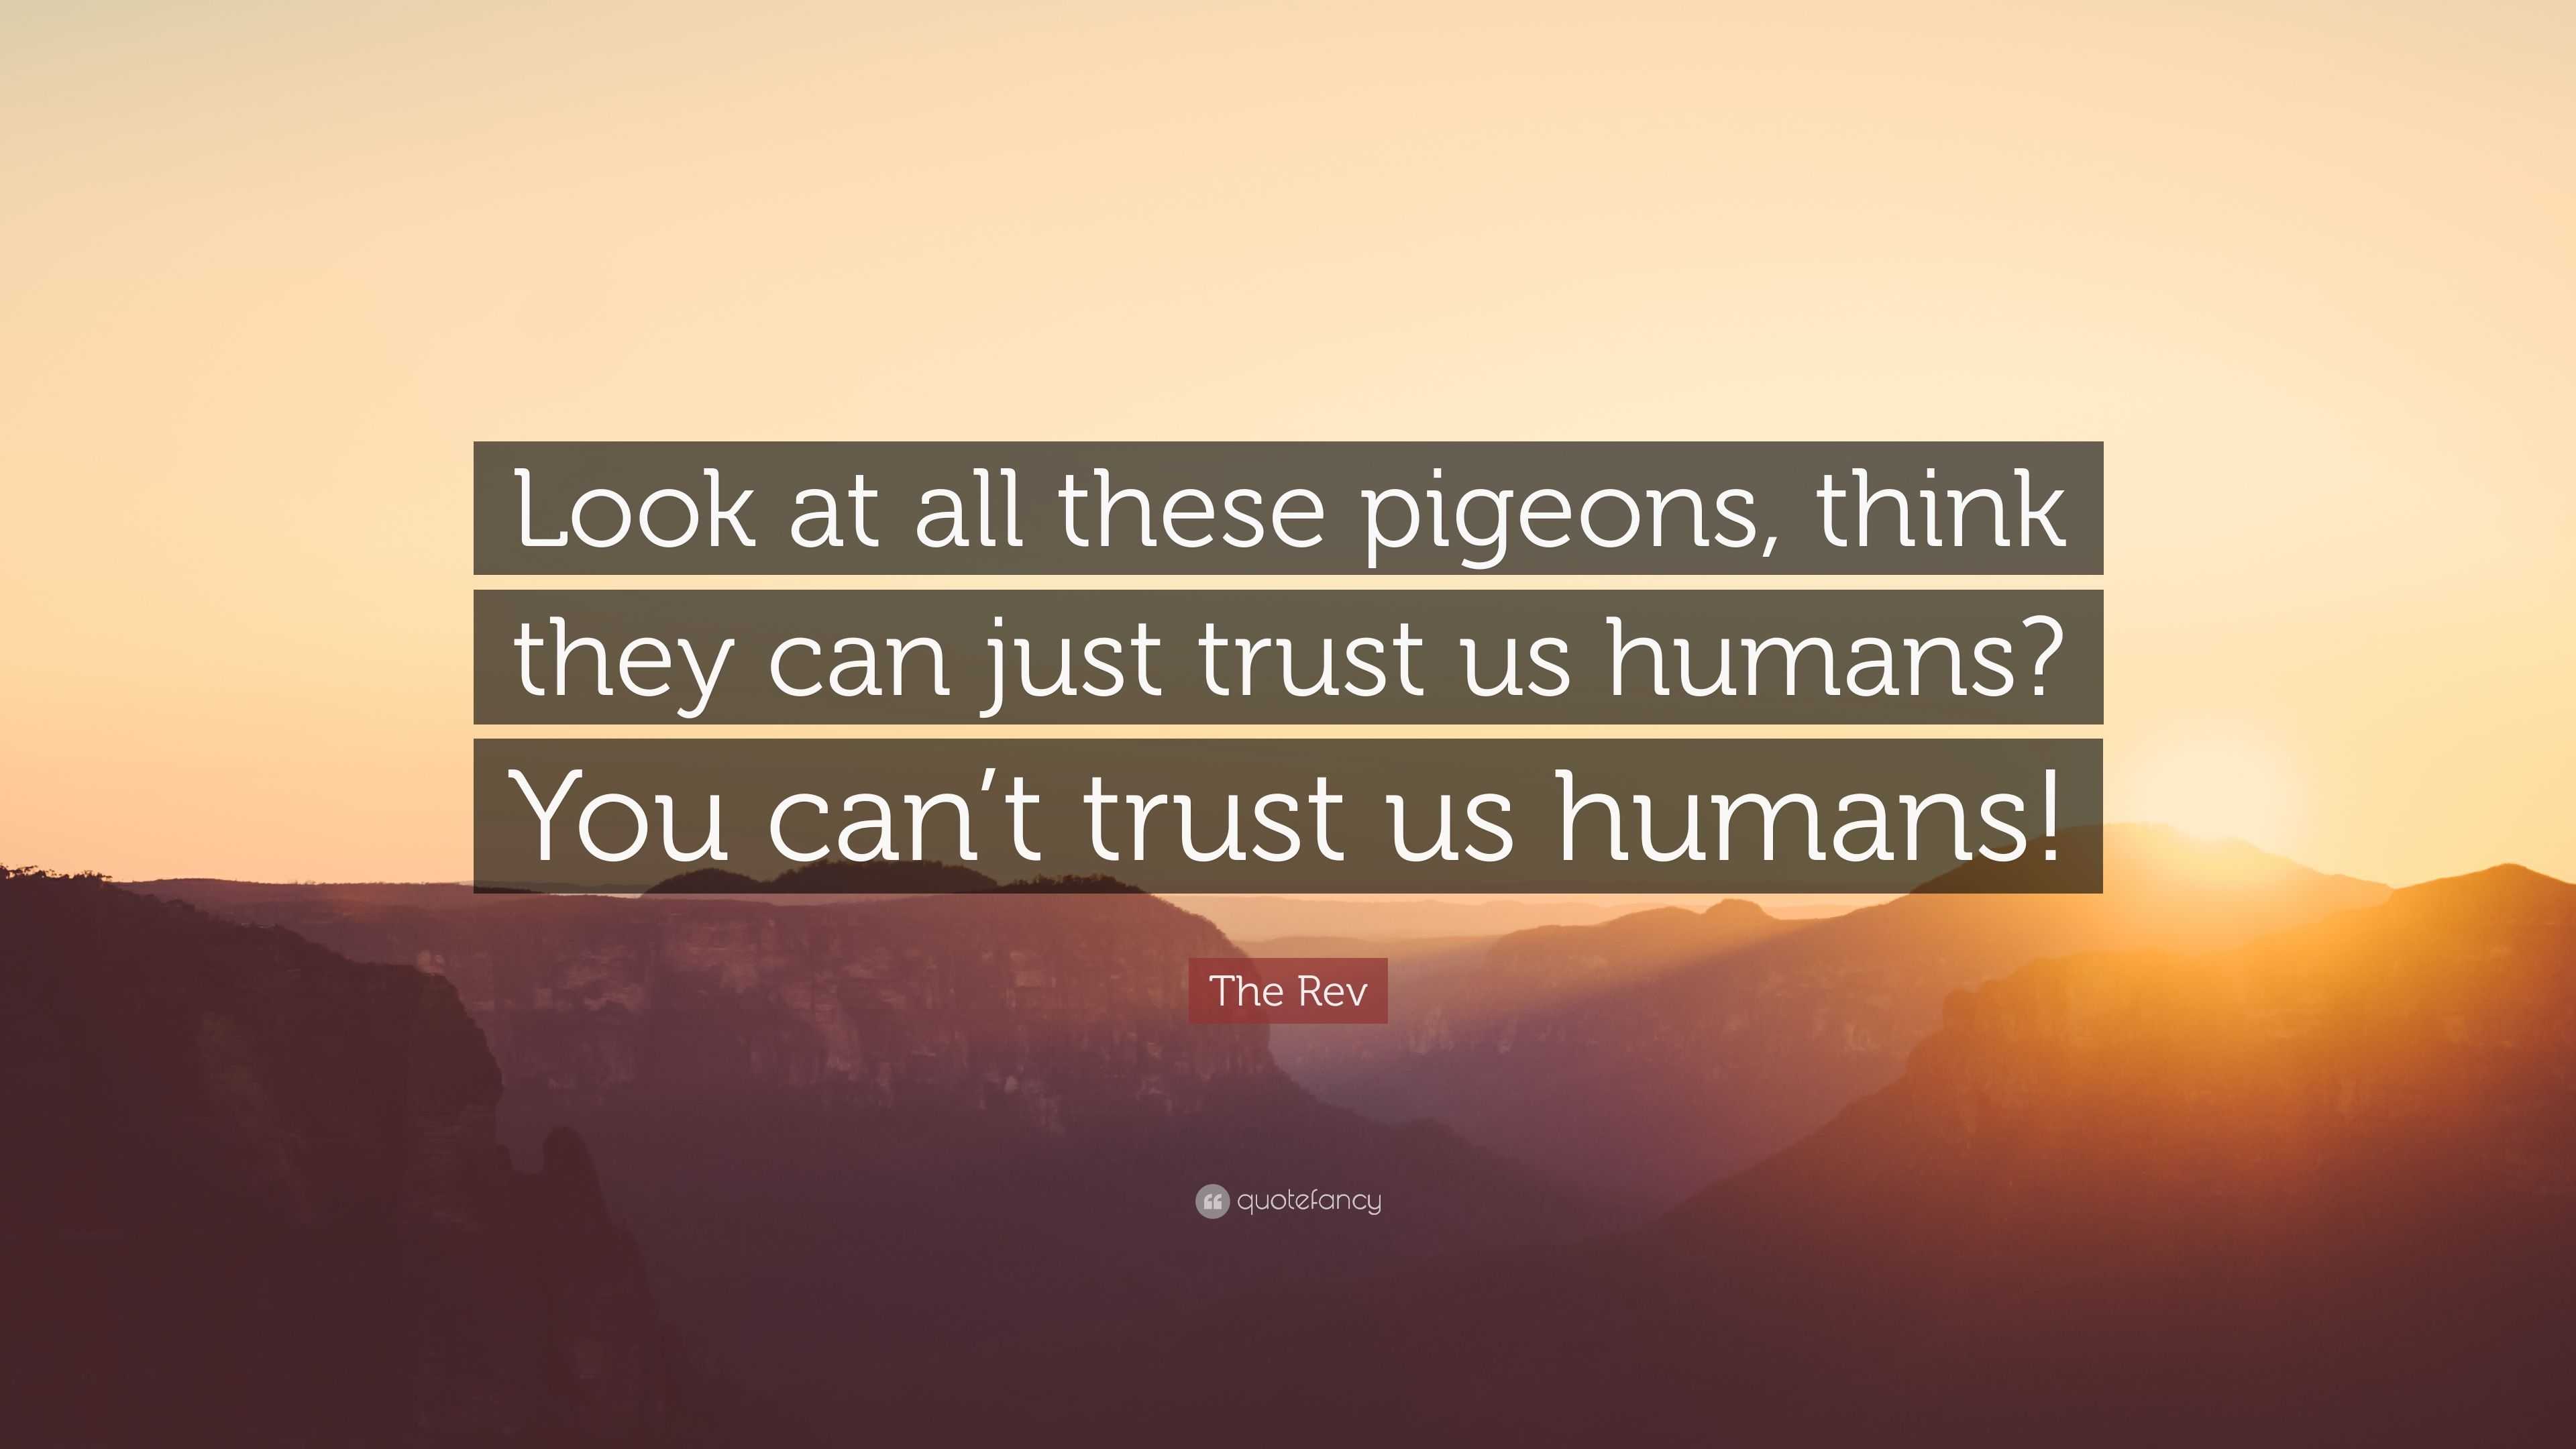 The Rev Quote Look At All These Pigeons Think They Can Just Trust Us Humans You Can T Trust Us Humans 7 Wallpapers Quotefancy